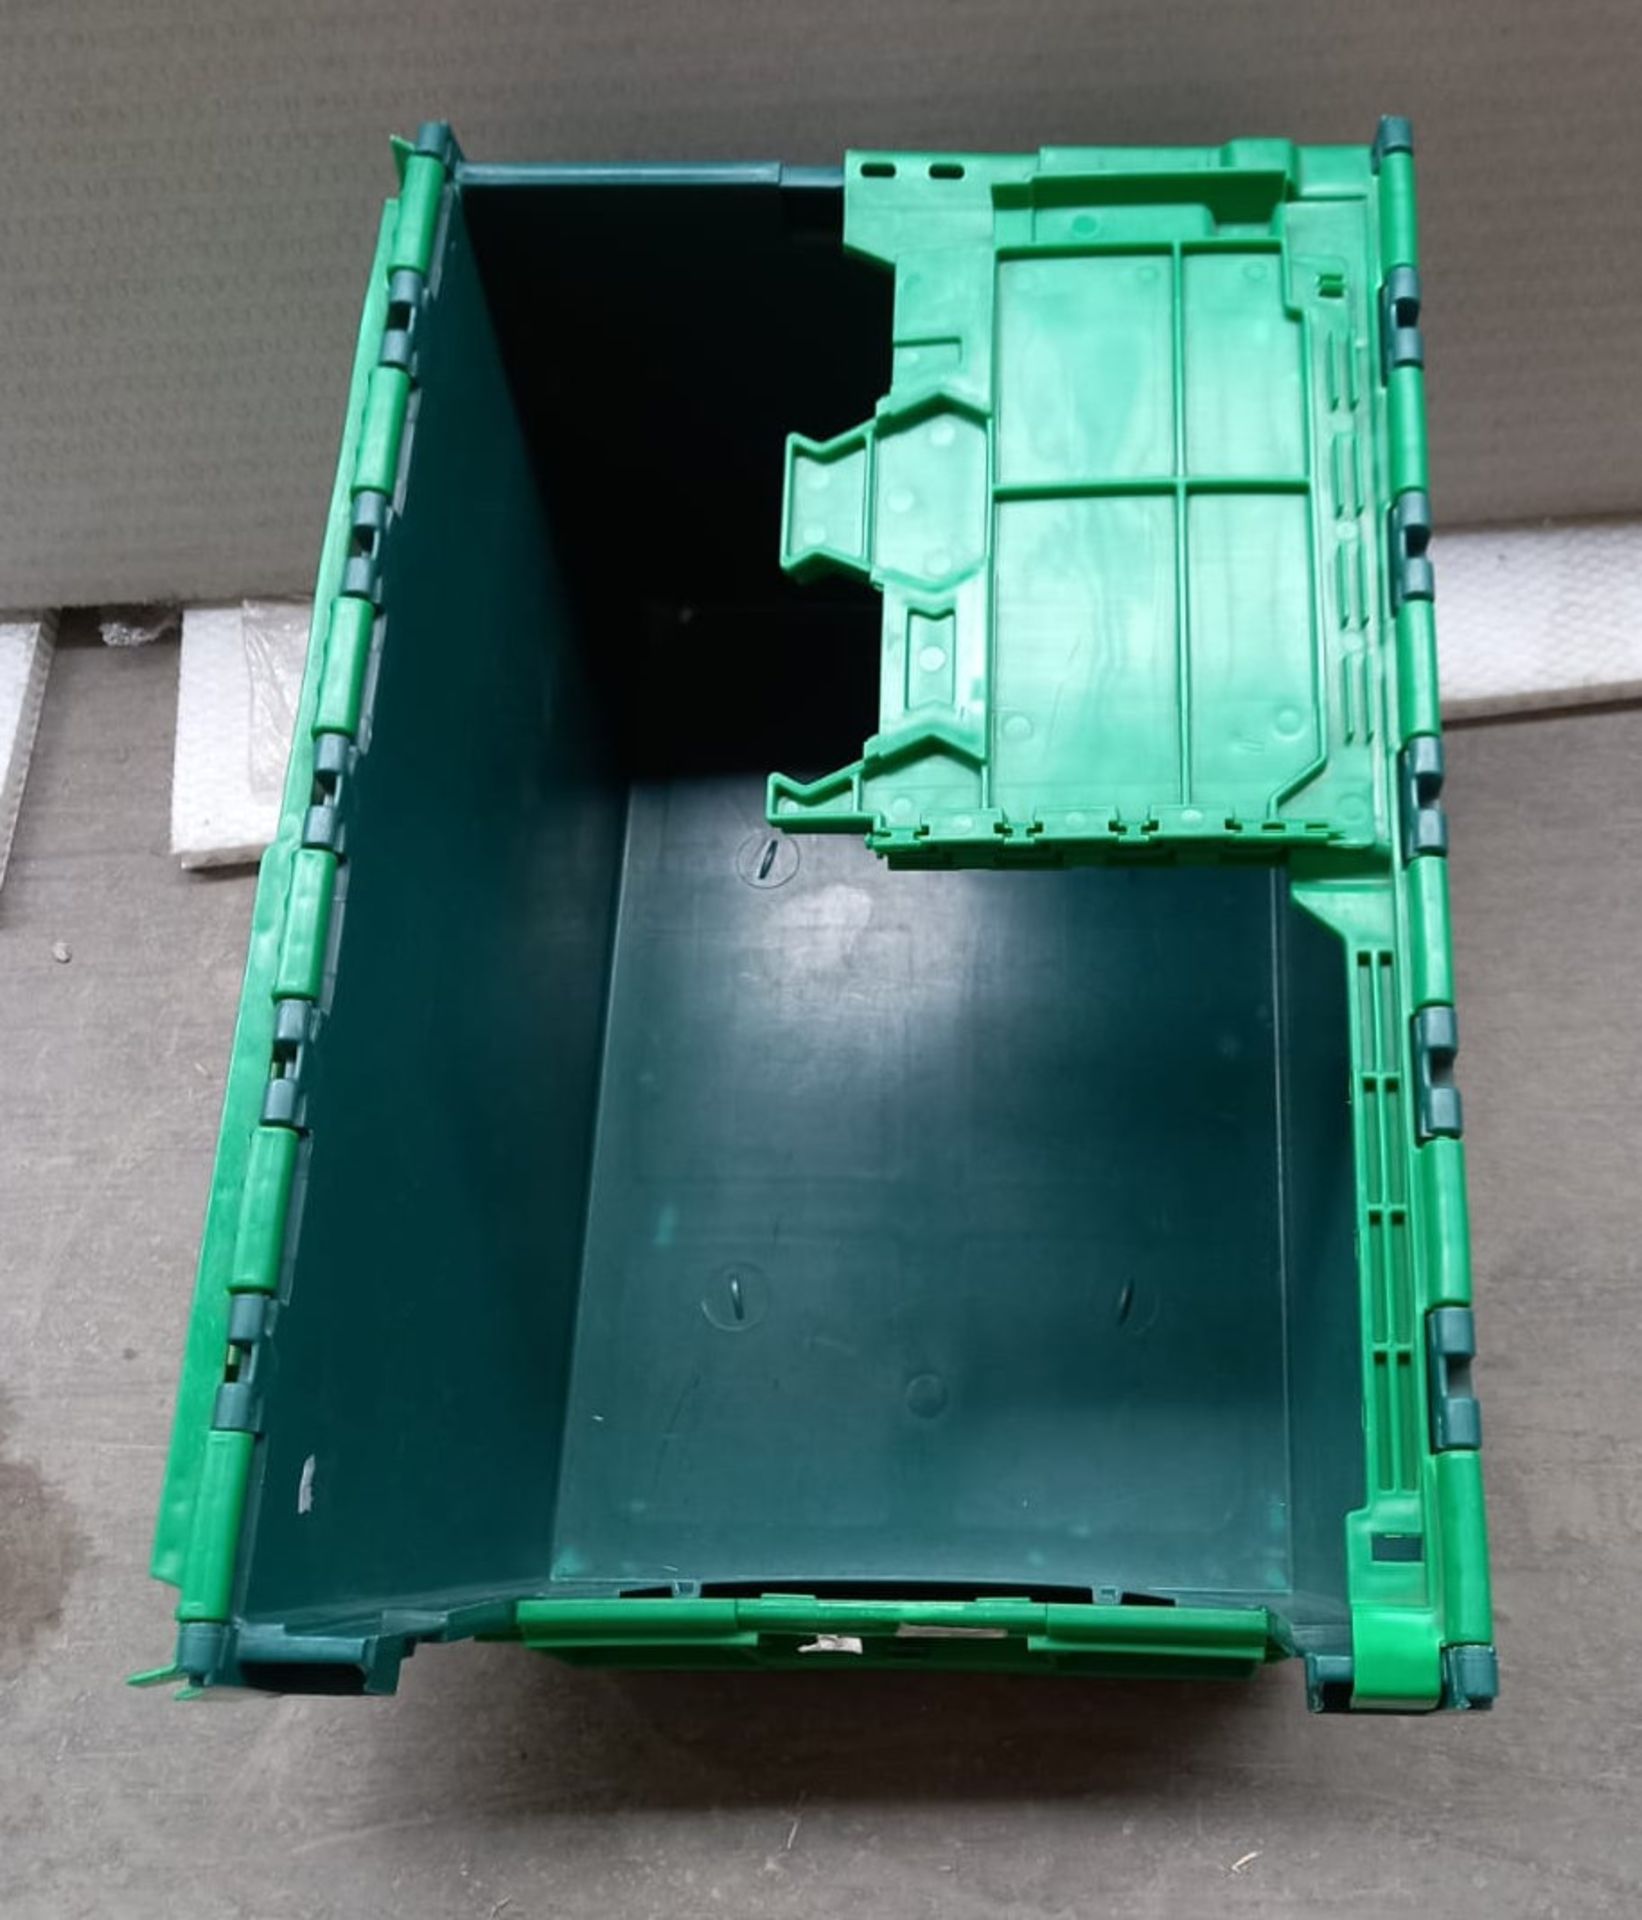 20 x Robust Green Plastic Secure Storage Tote Picking Boxes / Bins with Attached Back-Fold Hinged - Image 3 of 4